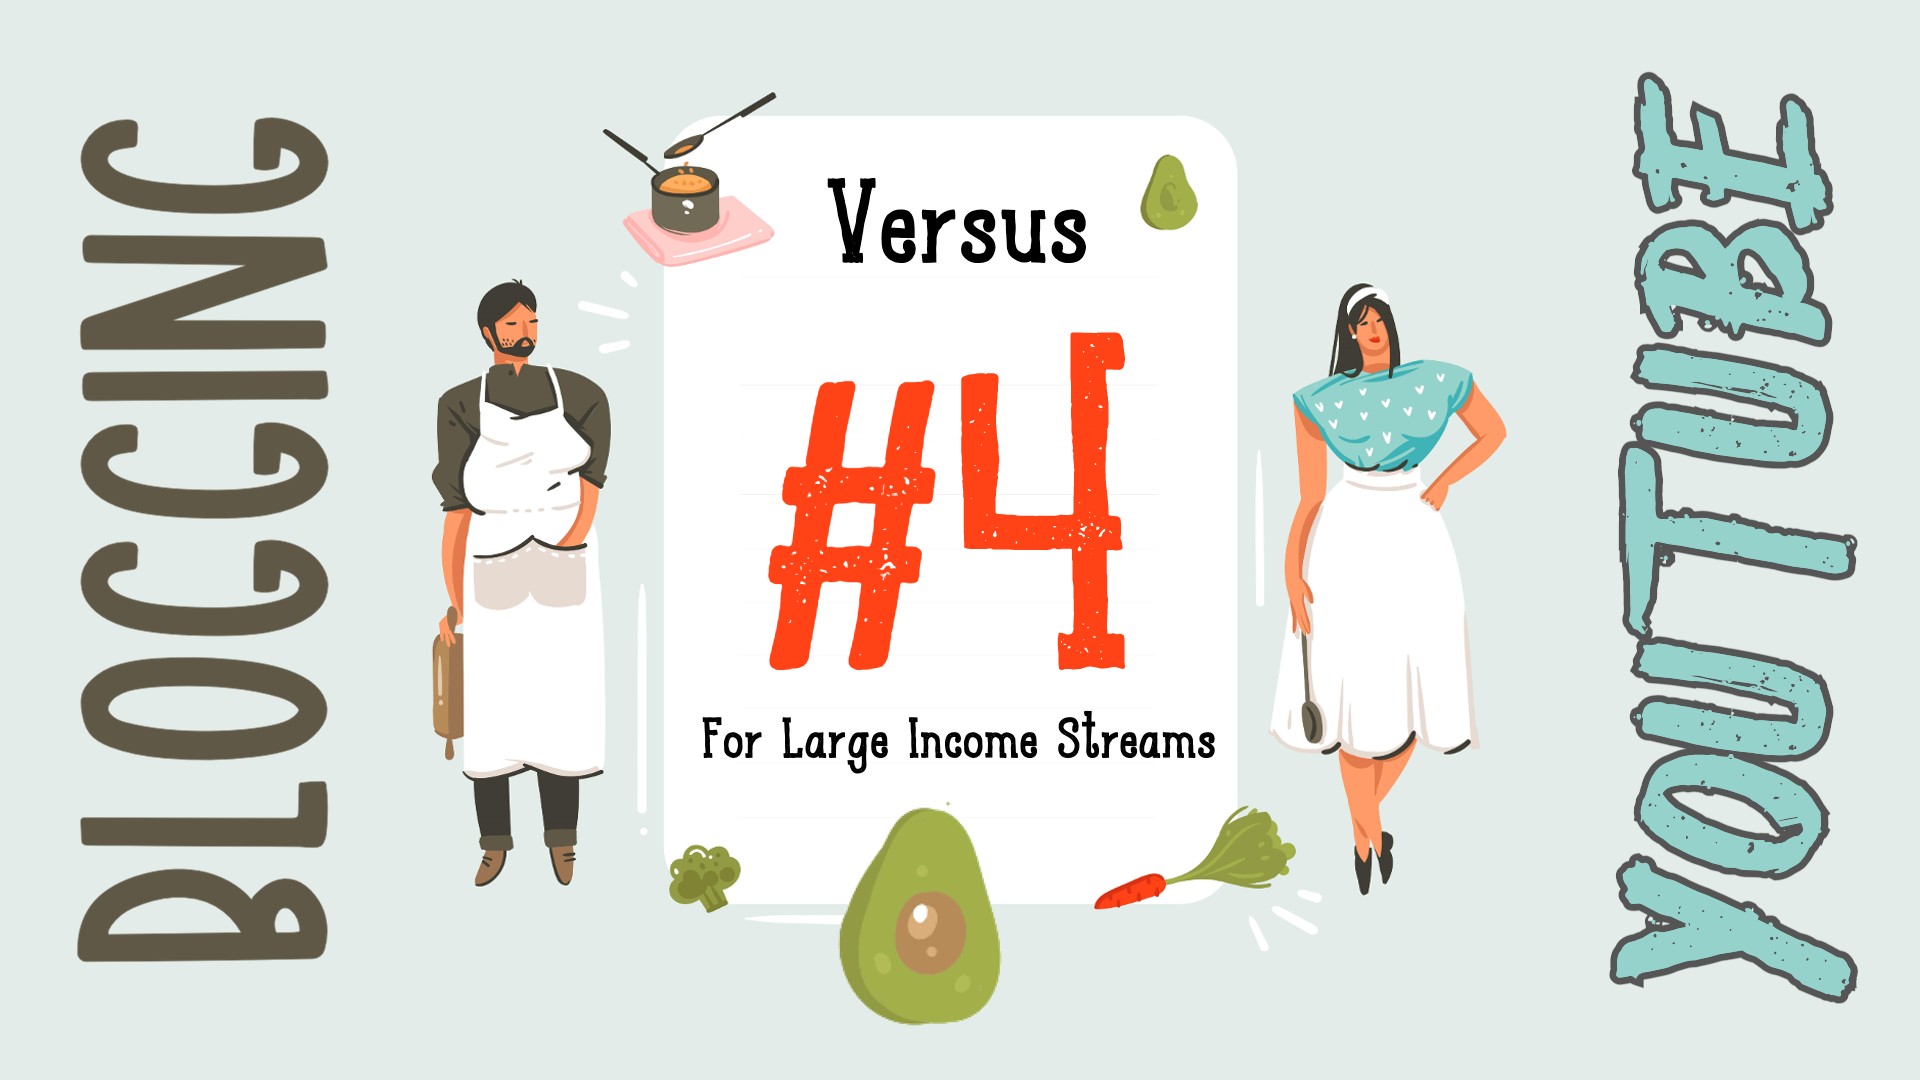 Blogging vs YouTube #4: For Large Income Streams